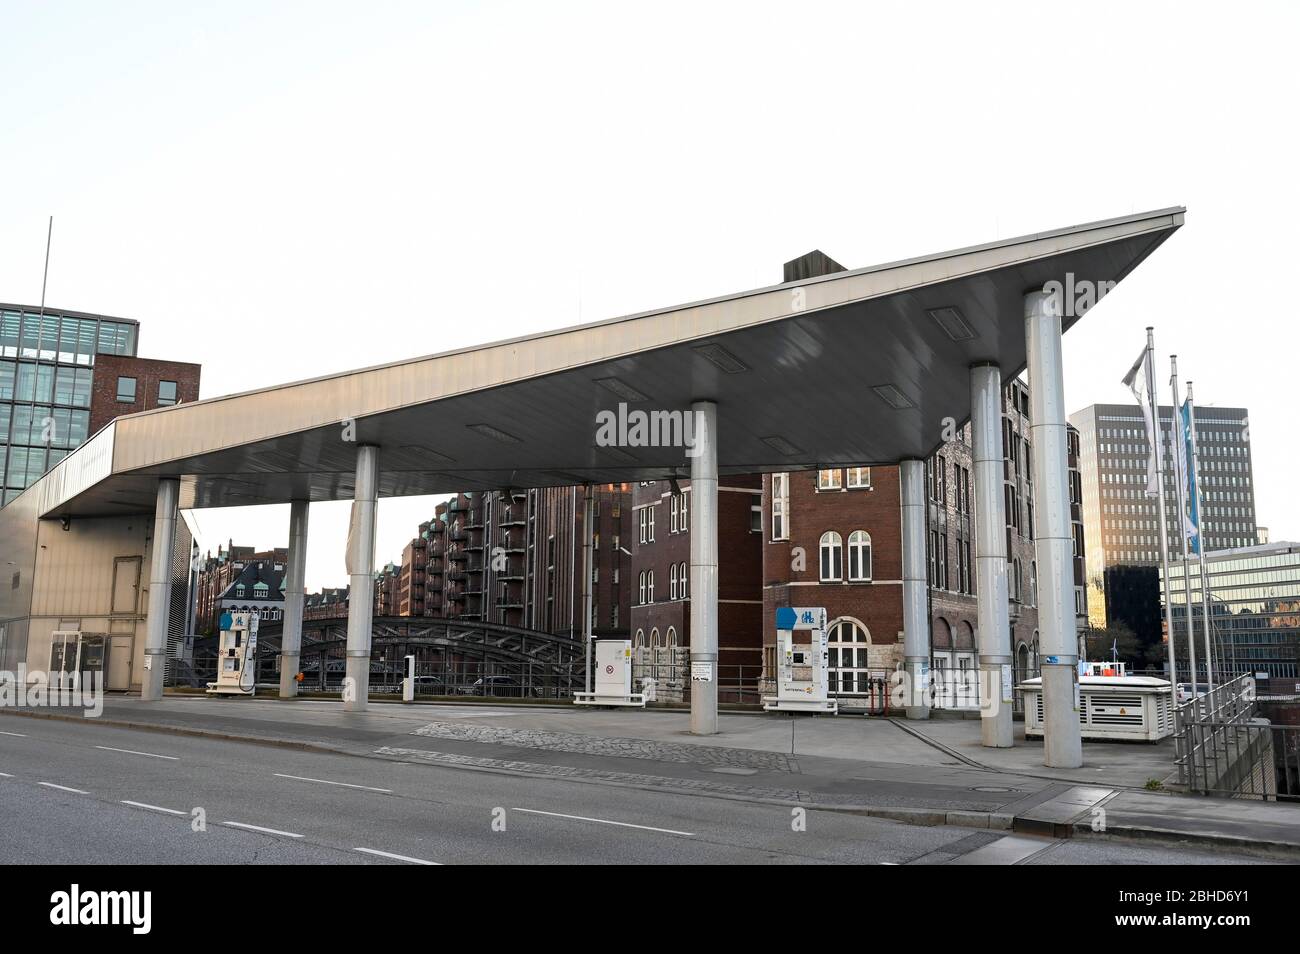 GERMANY, Hamburg Hafencity, harbour city, Hydrogen service station for fuel cell vehicle, Vattenfall Stock Photo